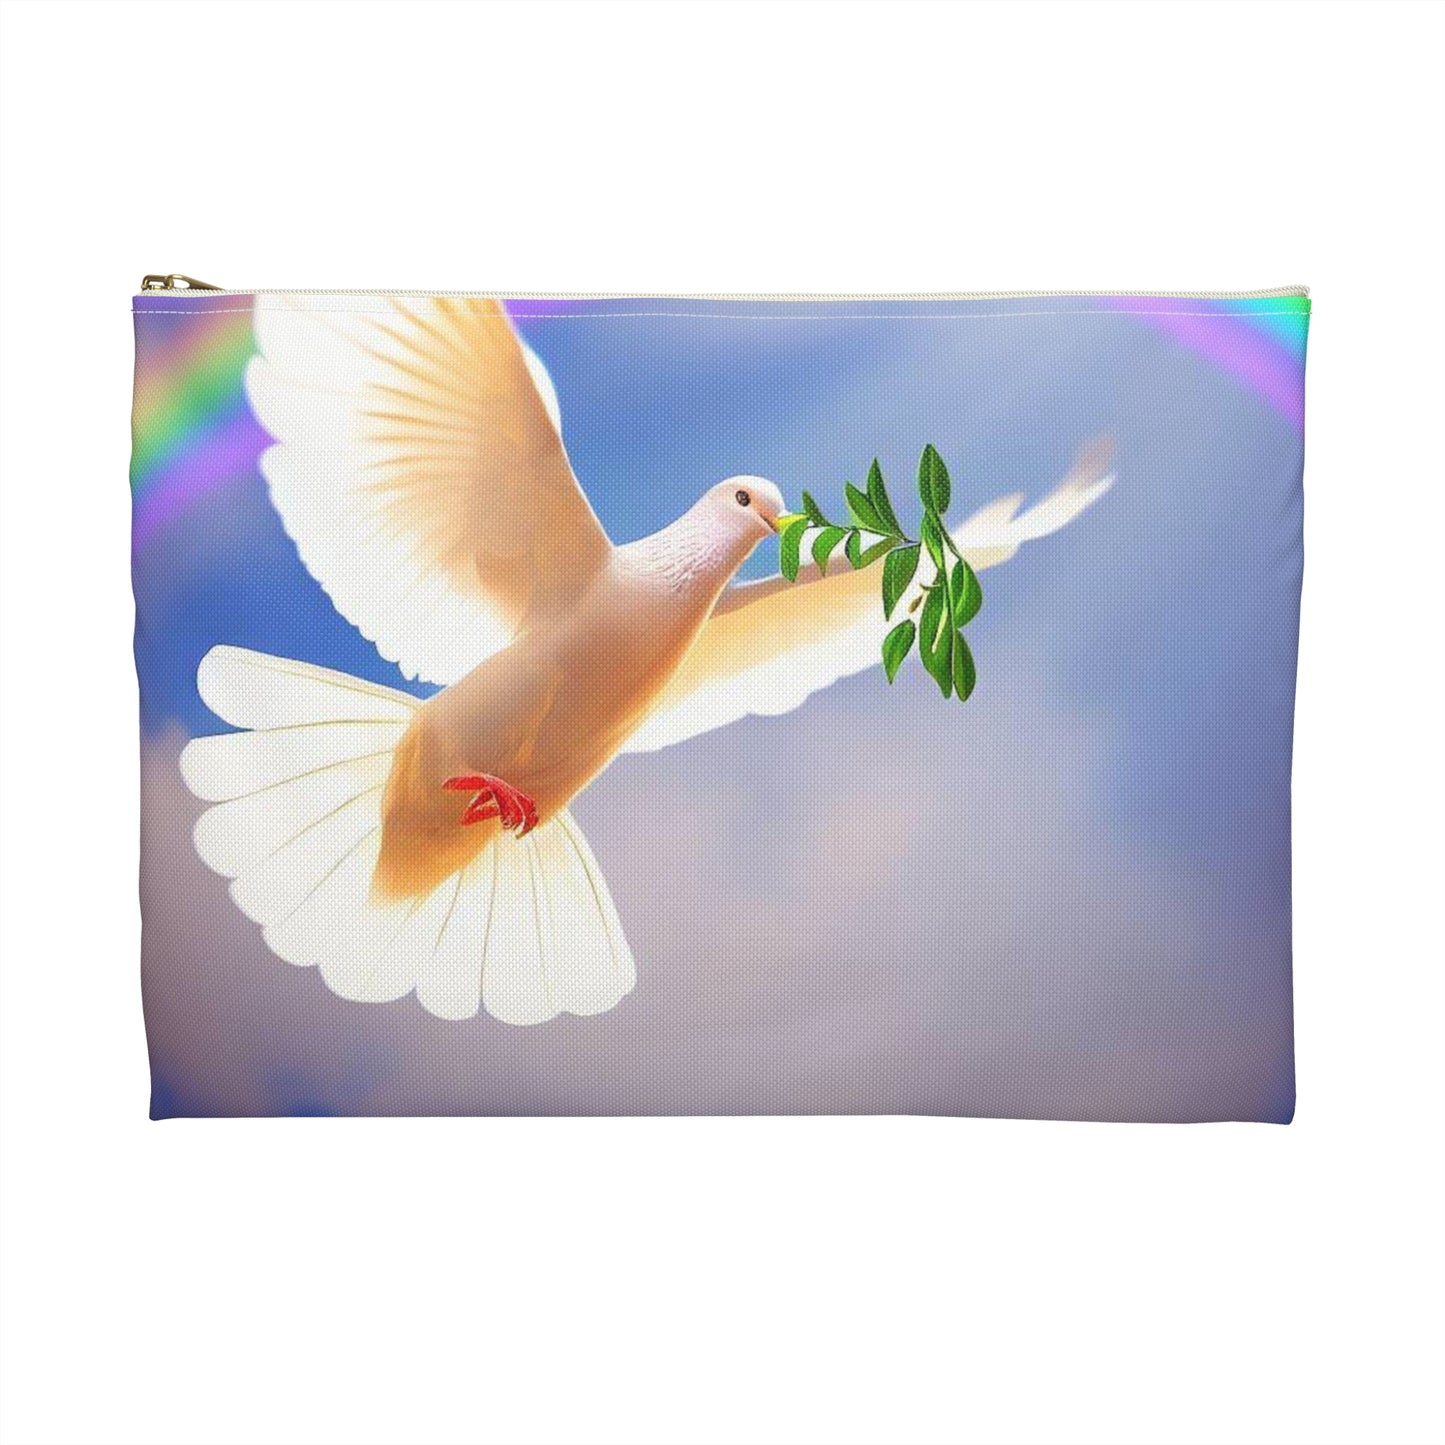 Christian Accessory Pouch / Jesus Accessory Pouch / Rainbow Accessory Pouch